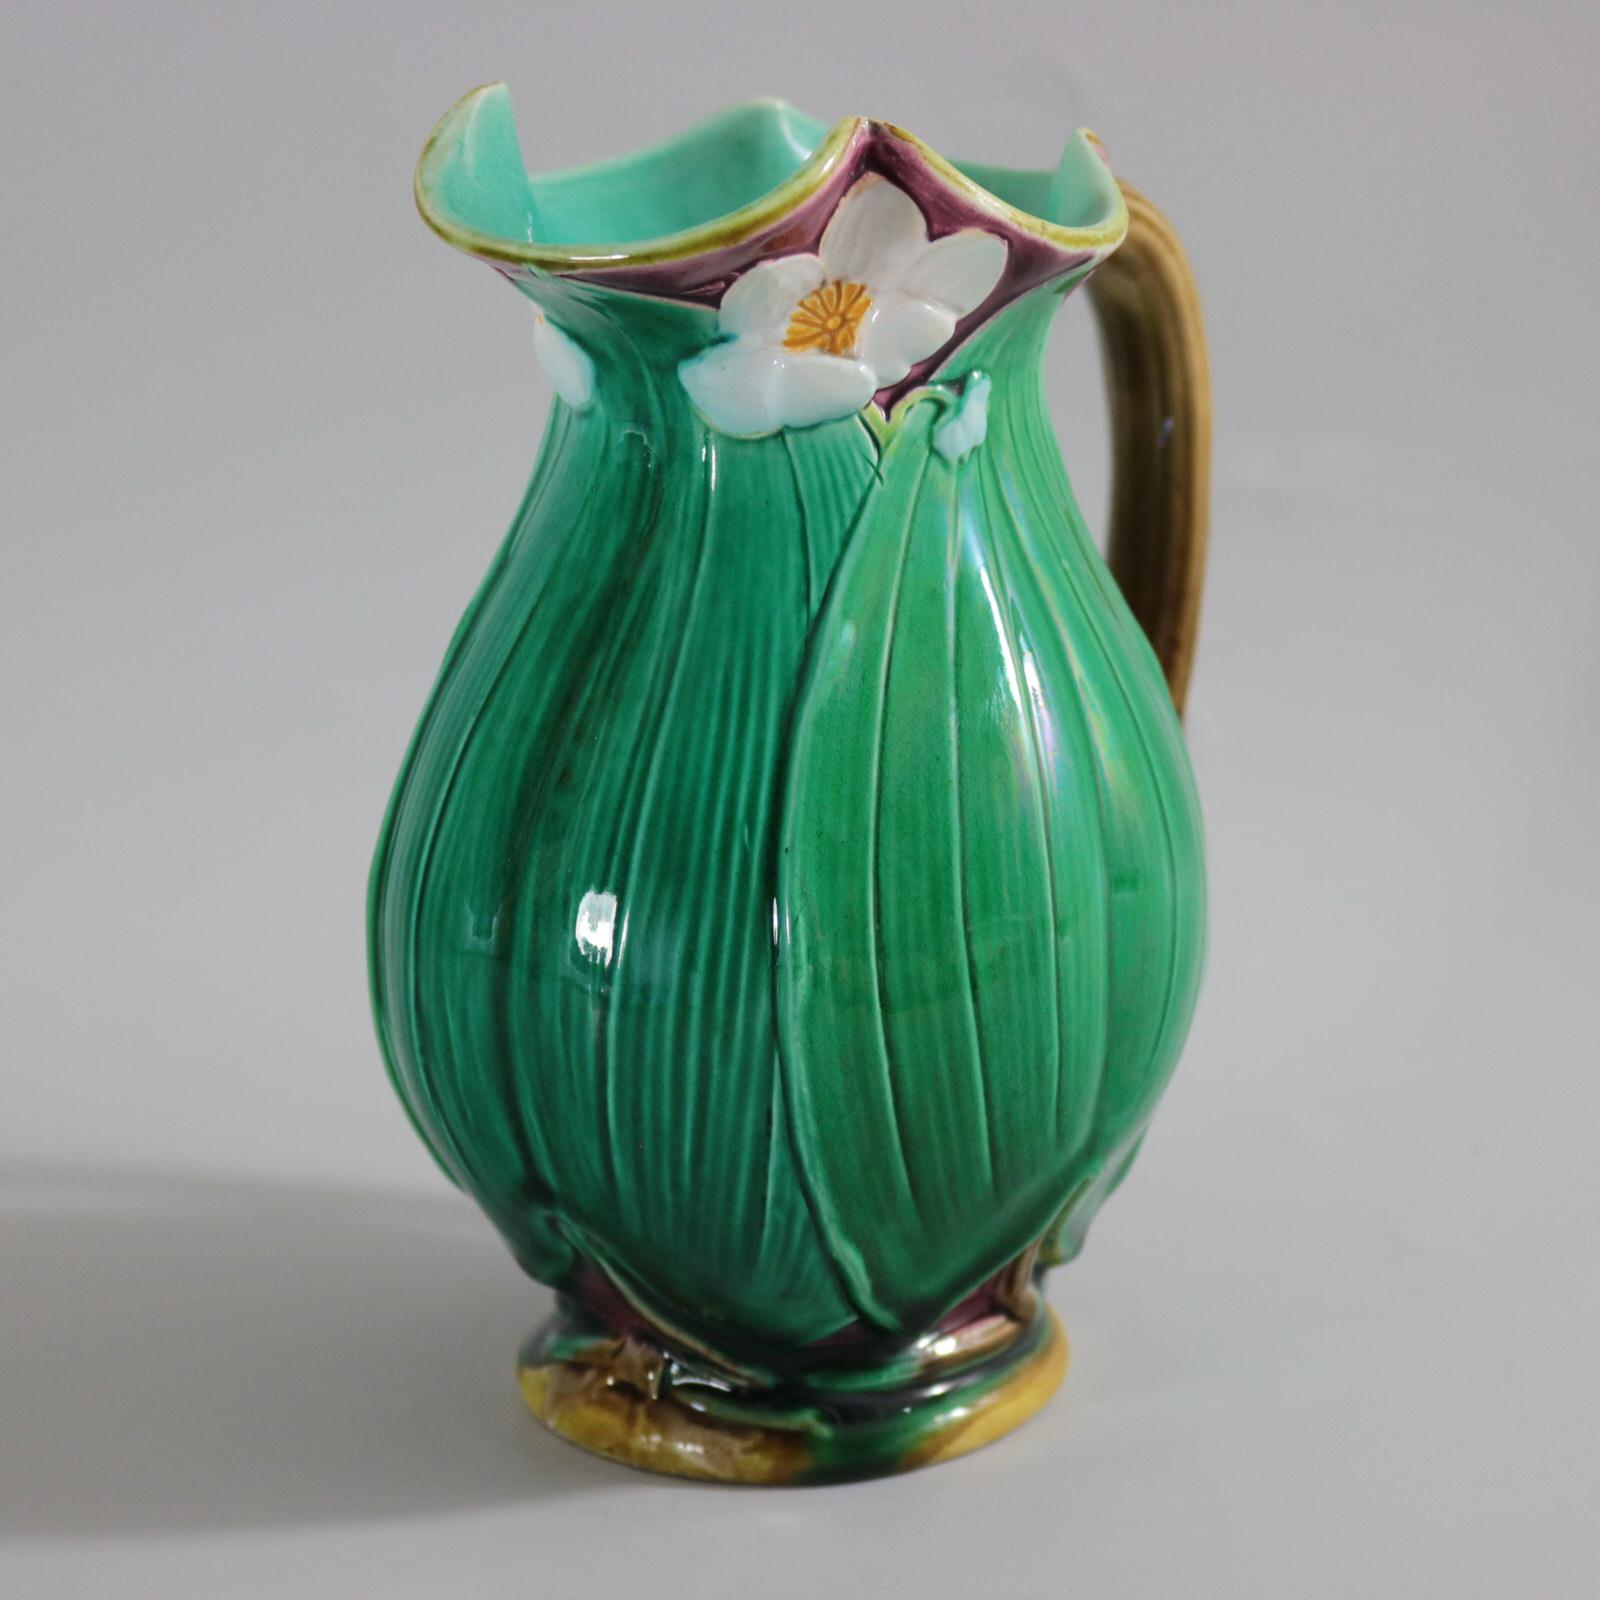 Small Minton Majolica Lily Jug/Pitcher For Sale 1